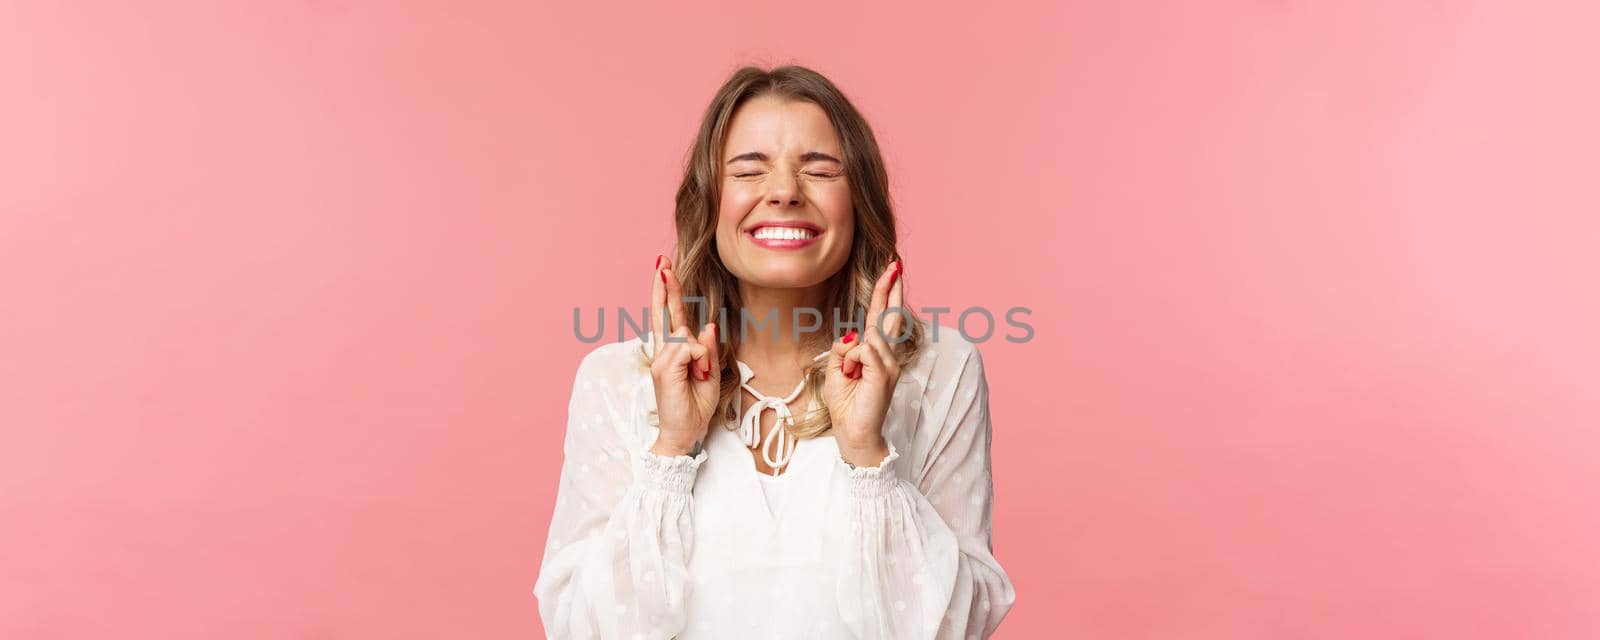 Portrait of excited hopeful blond girl making wish crossed fingers for good luck, close eyes and smiling putting all effort into pray, pleading for dream come true, anticipating over pink background.